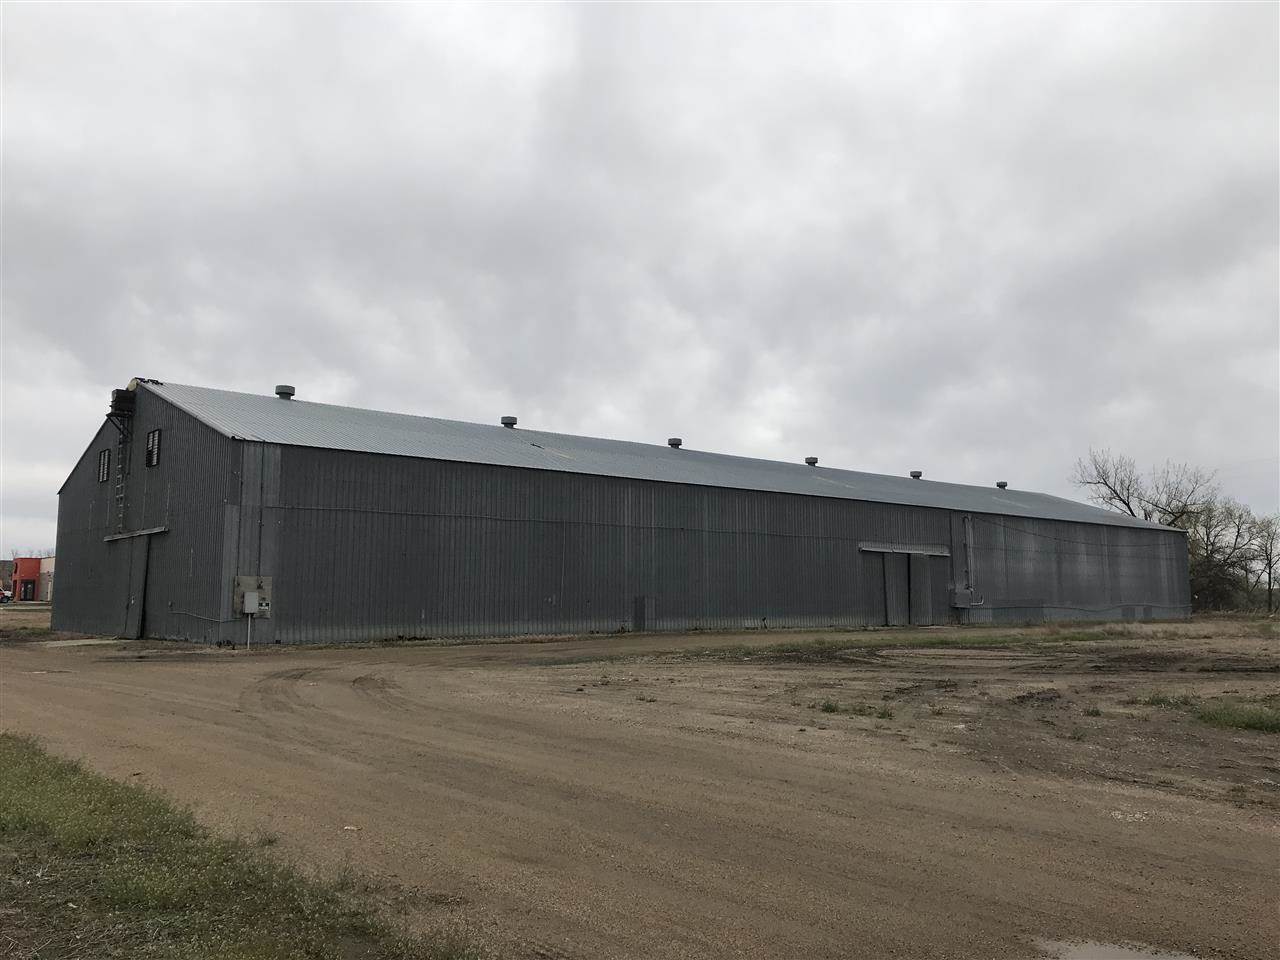 Tbd, Parshall, ND 58770